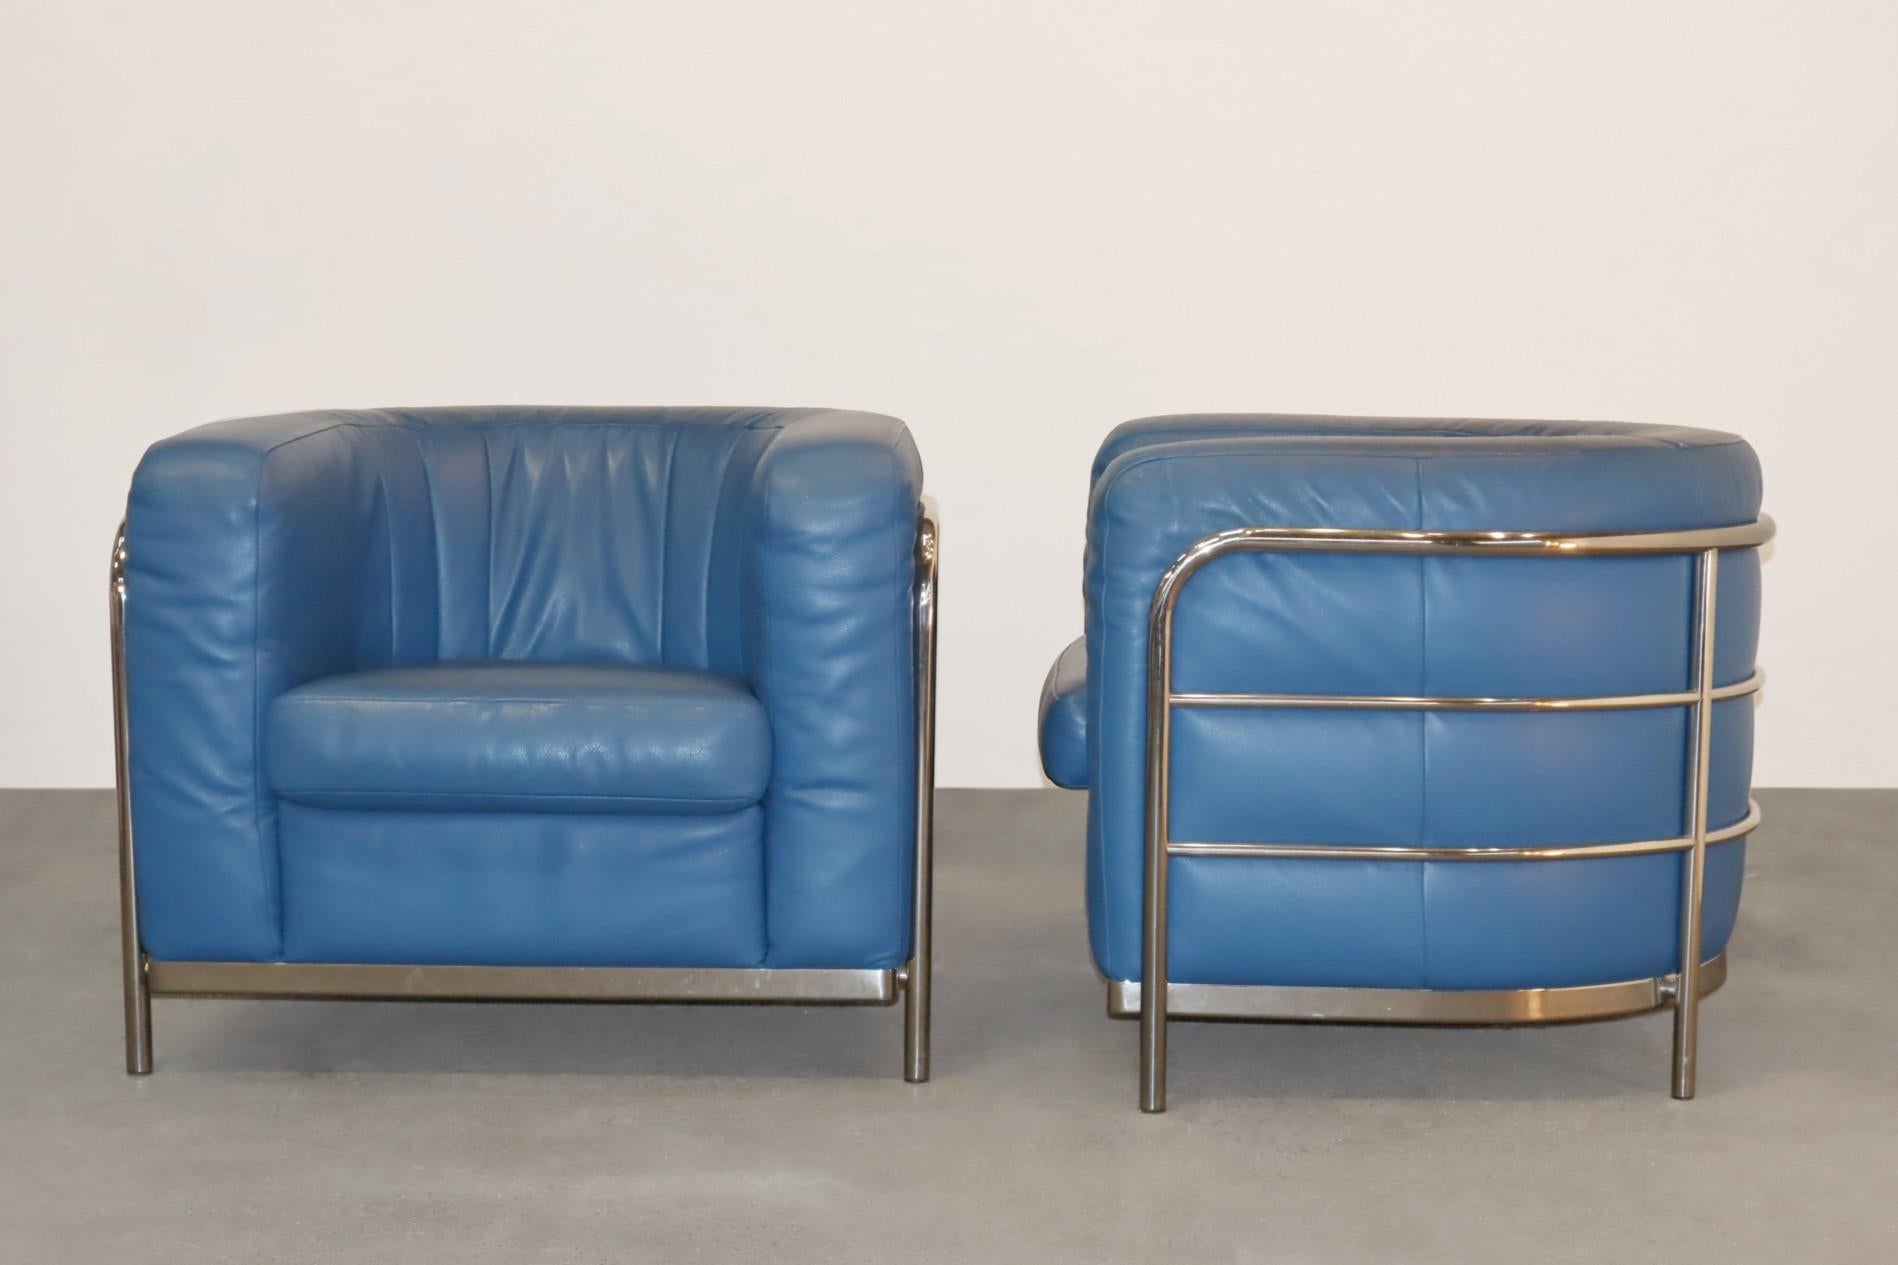 De Pas, D’Urbino and Lomazzi for Zanotta, pair of lounge chairs, model 'Onda', blue leather, chrome, Italy, 1985

Provenance: these chairs were in a C-Suite executive office of an insurance corporation. Very good conditon with only light signs of